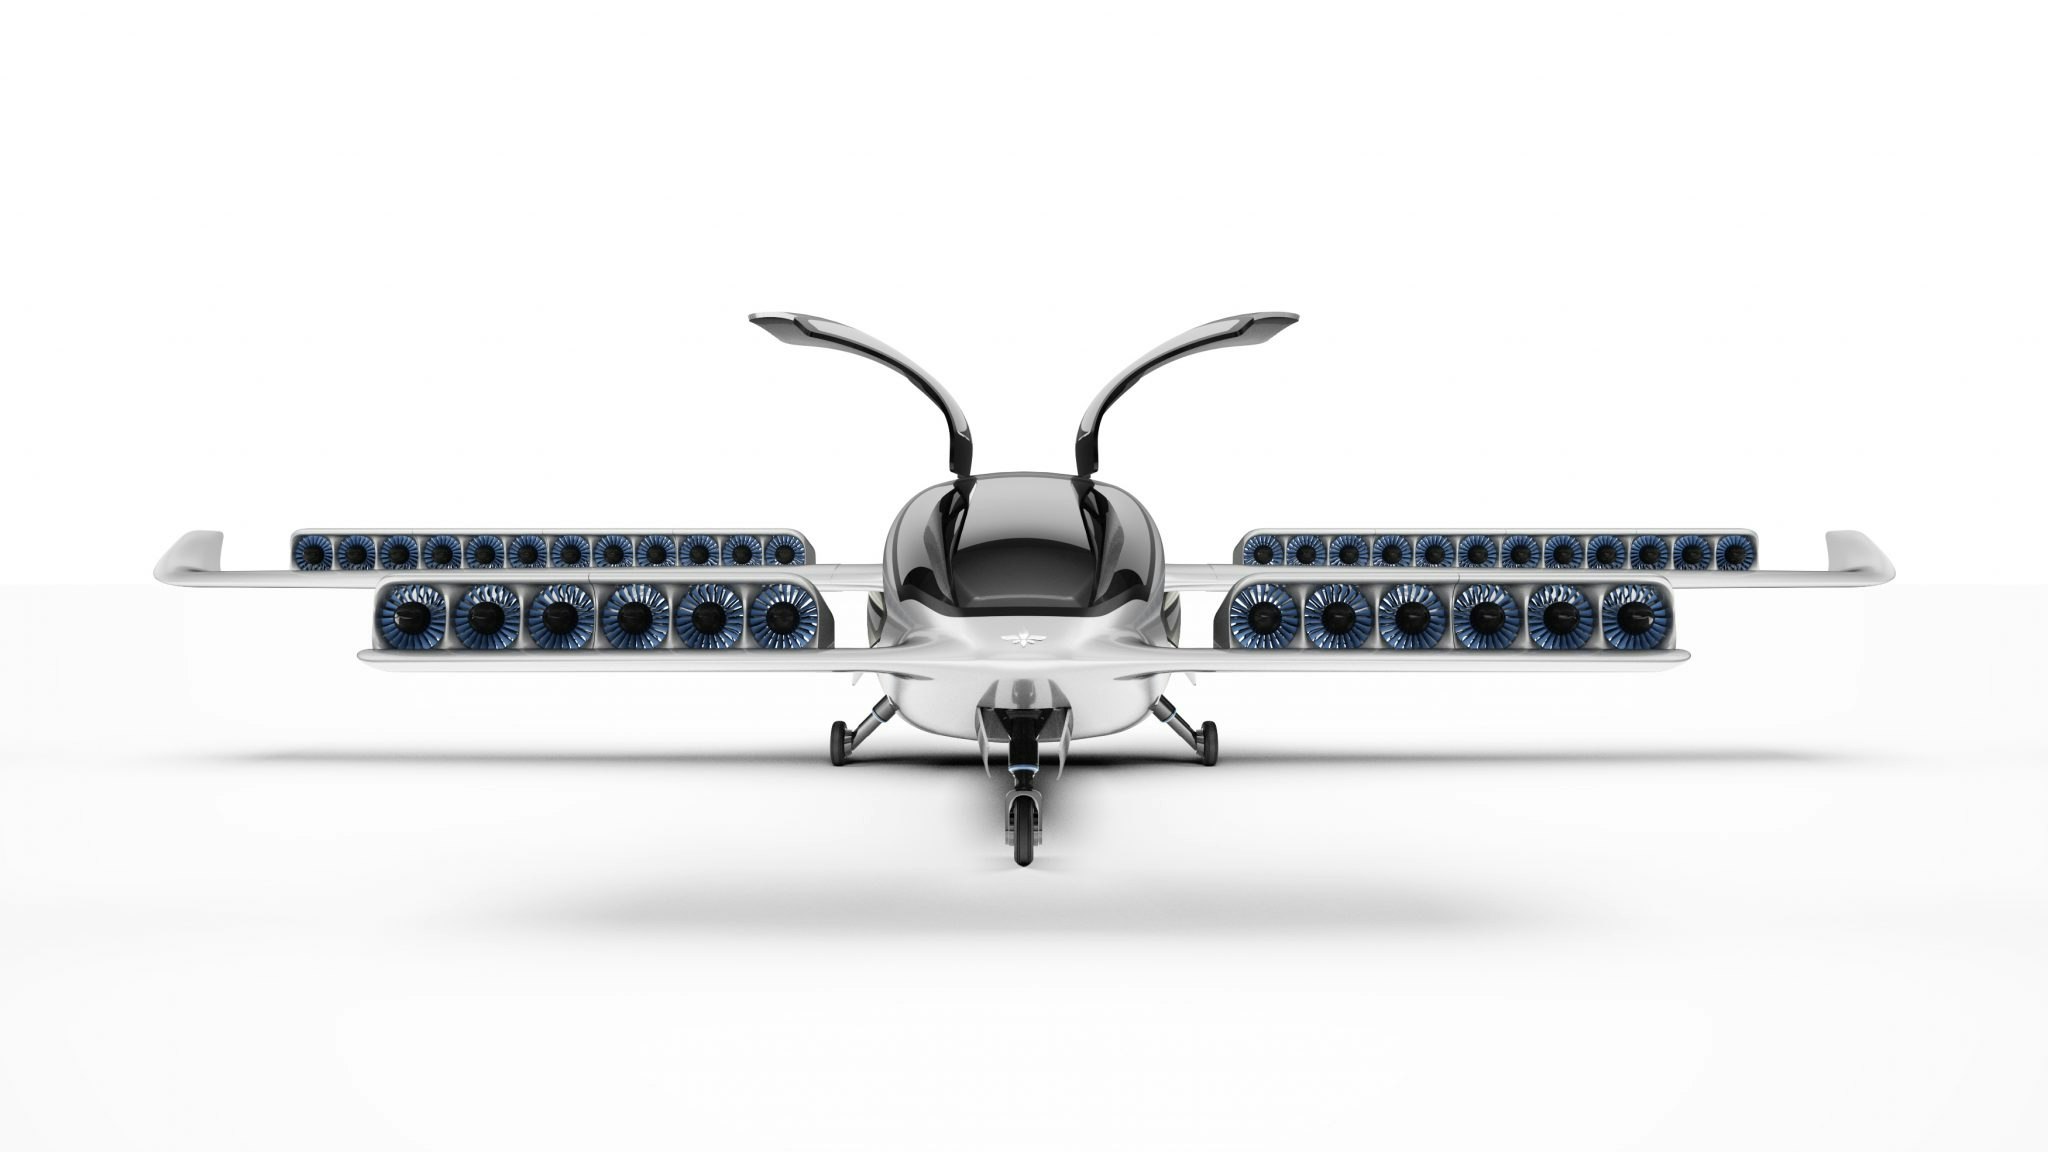 Lilium's all-electric, vertical take-off jet